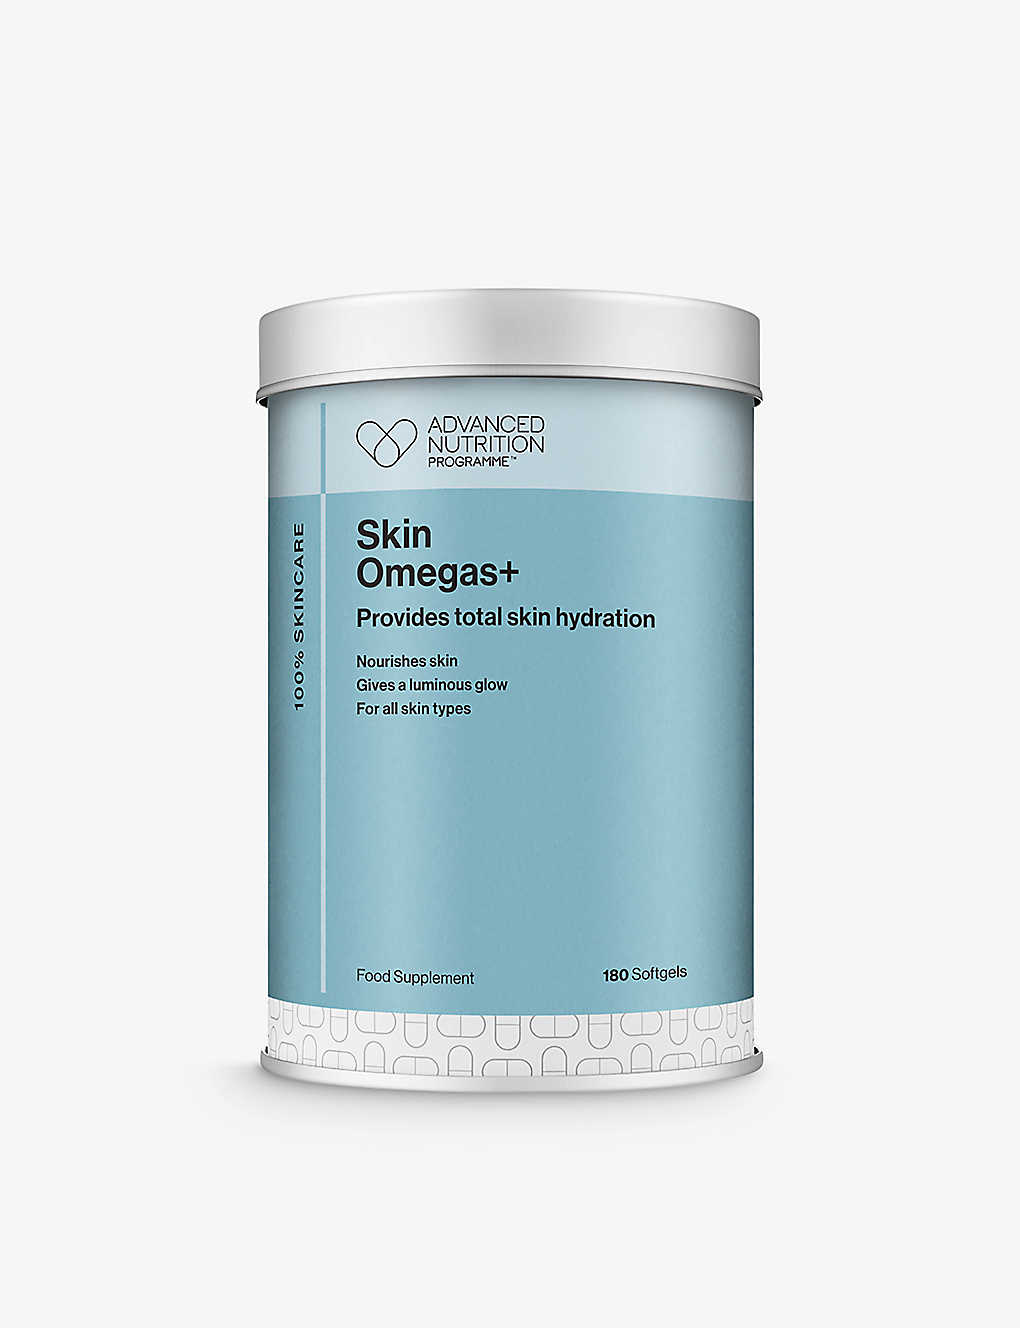 Advanced Nutrition Programme Skin Omegas+ Supplement 180 Capsules